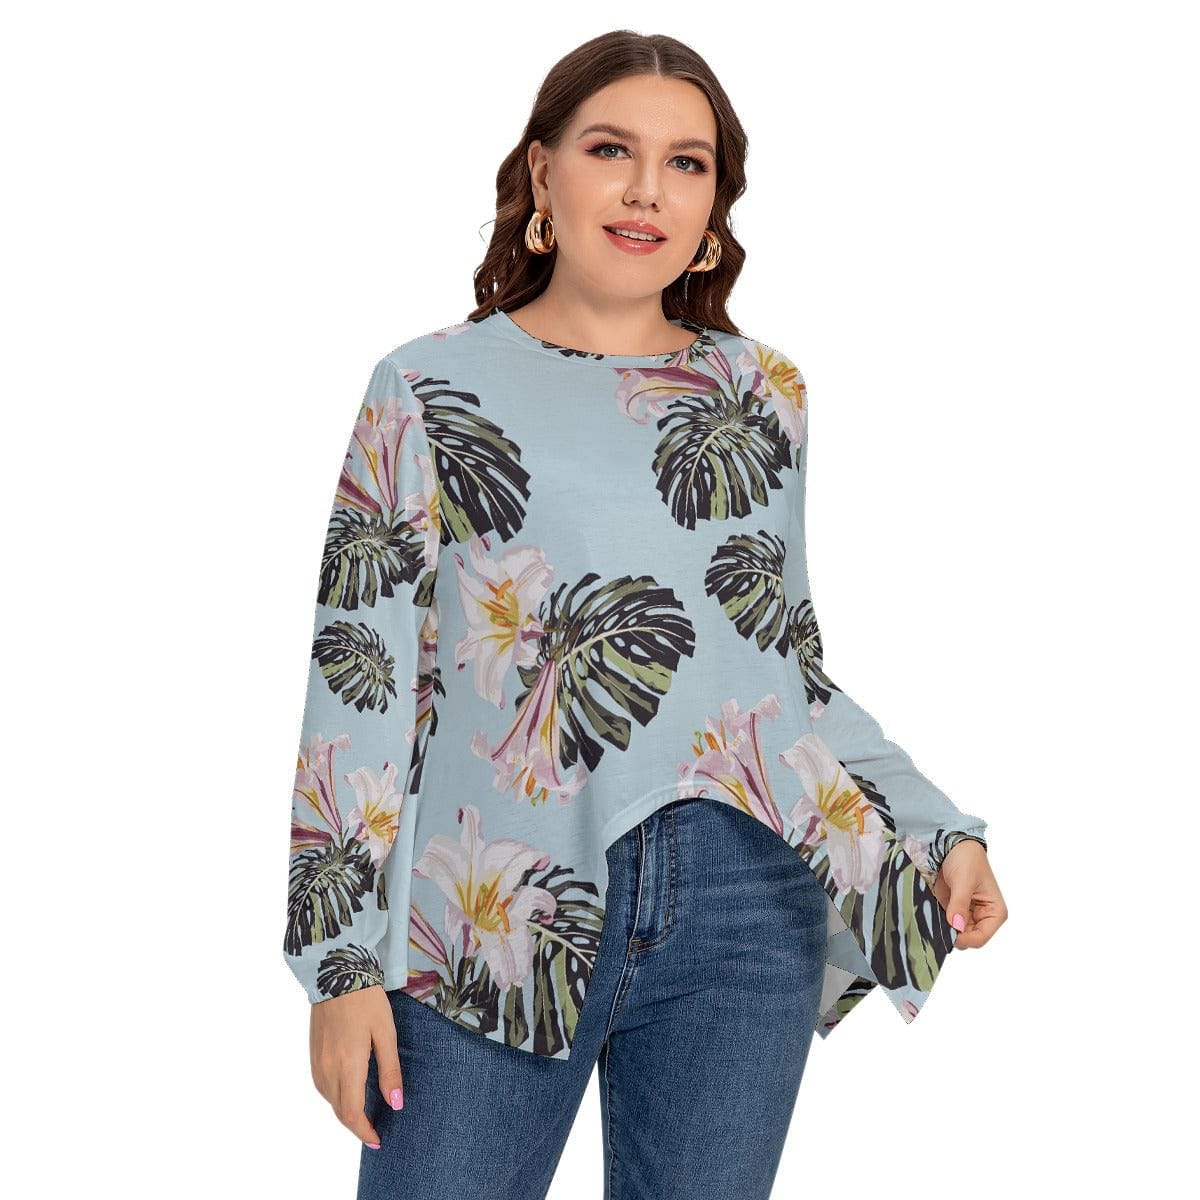 All-Over Print Women’s T-shirt With Asymmetrical Hem(Plus Size)